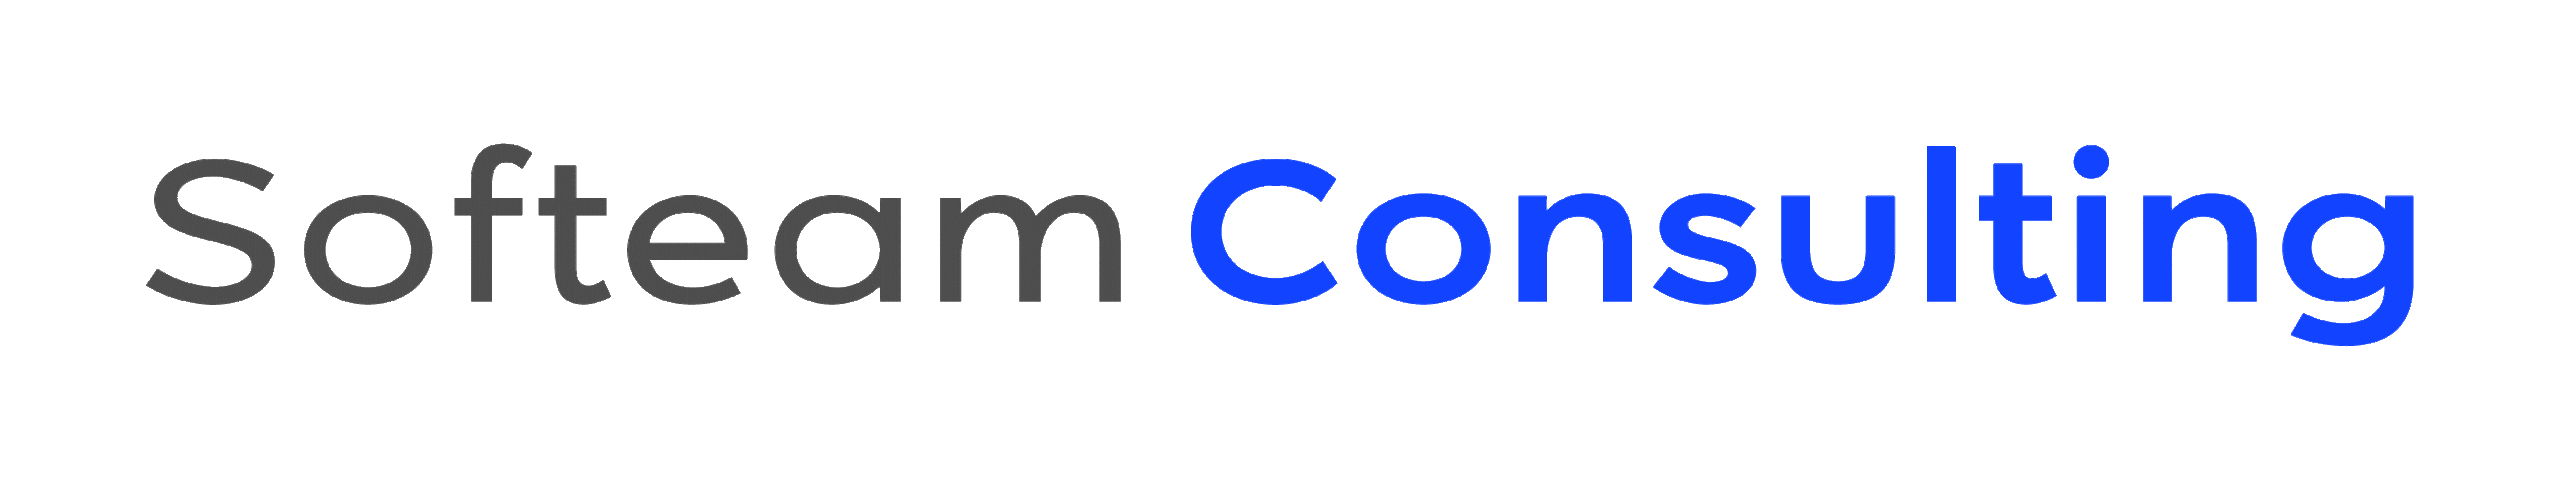 SofteamConsulting_logo_CMJN-scaled